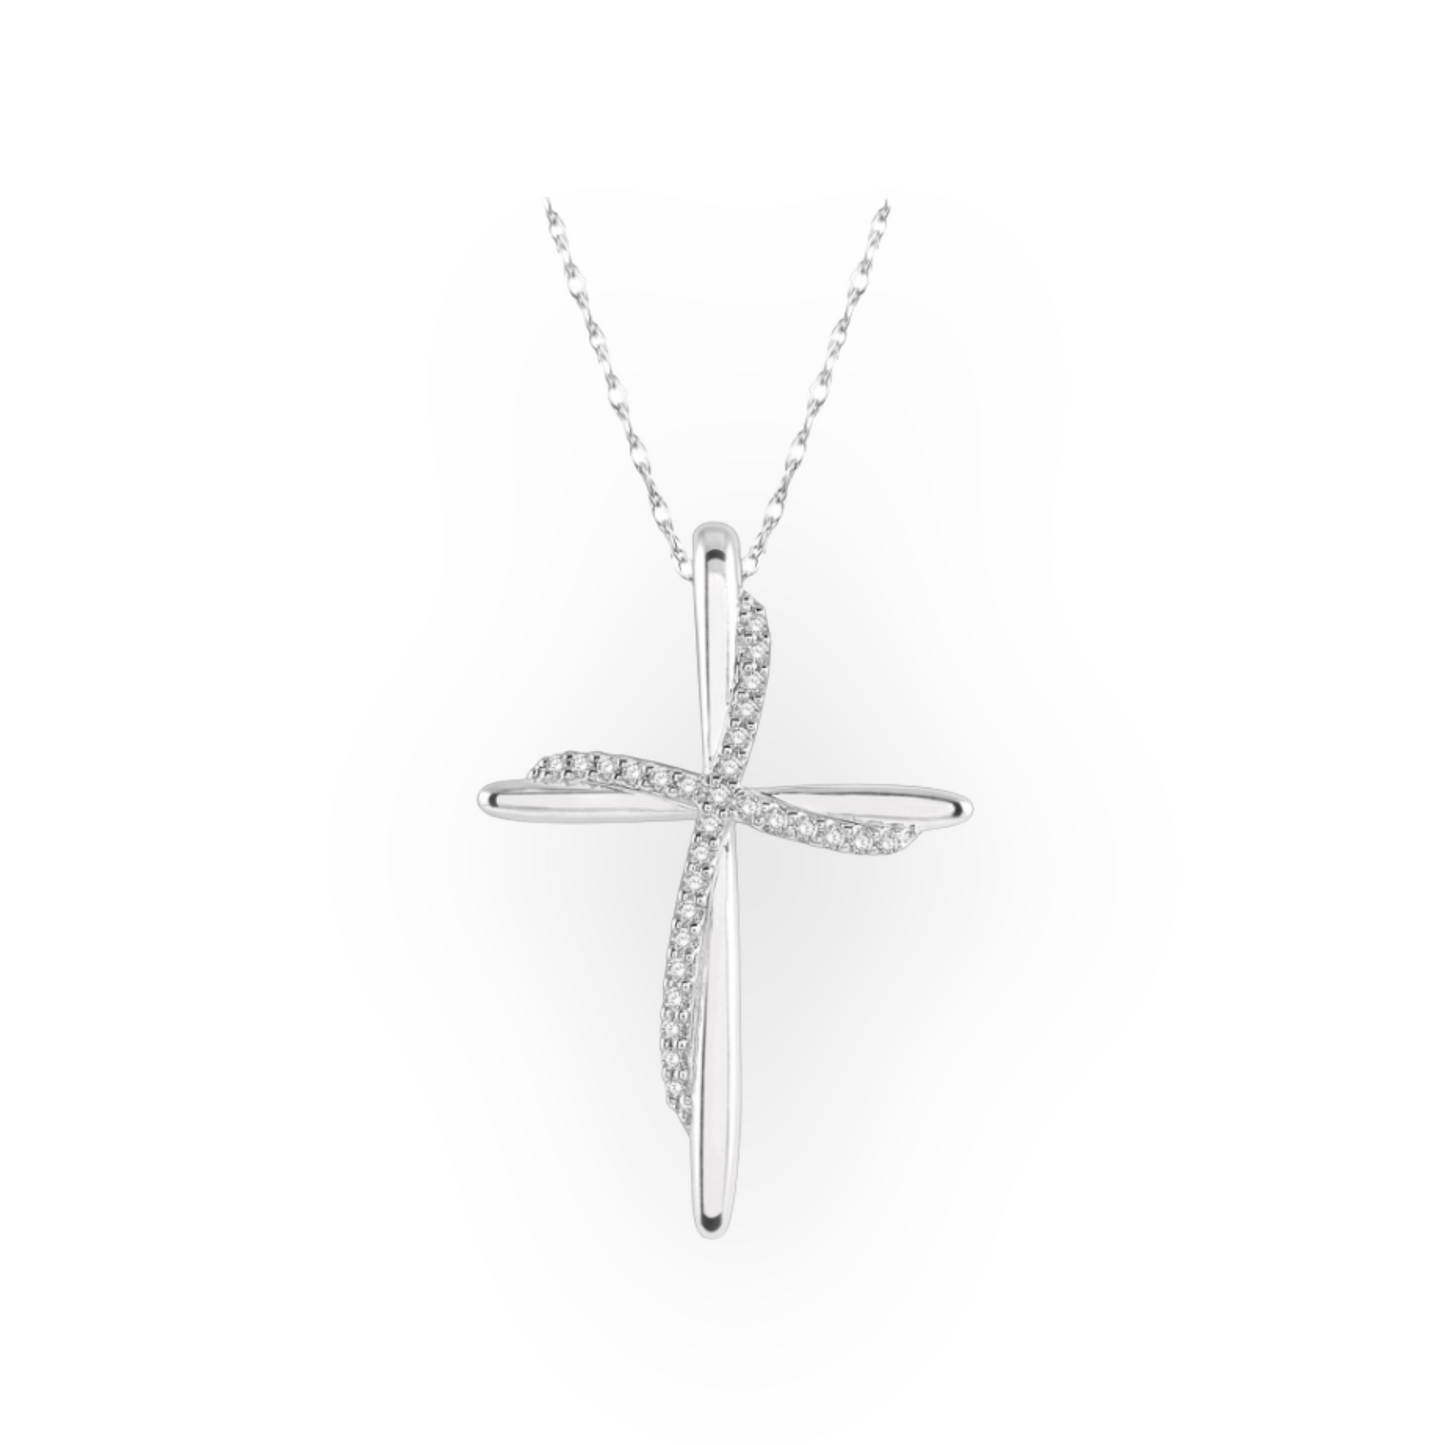 Load image into Gallery viewer, Diamond Cross Necklace
